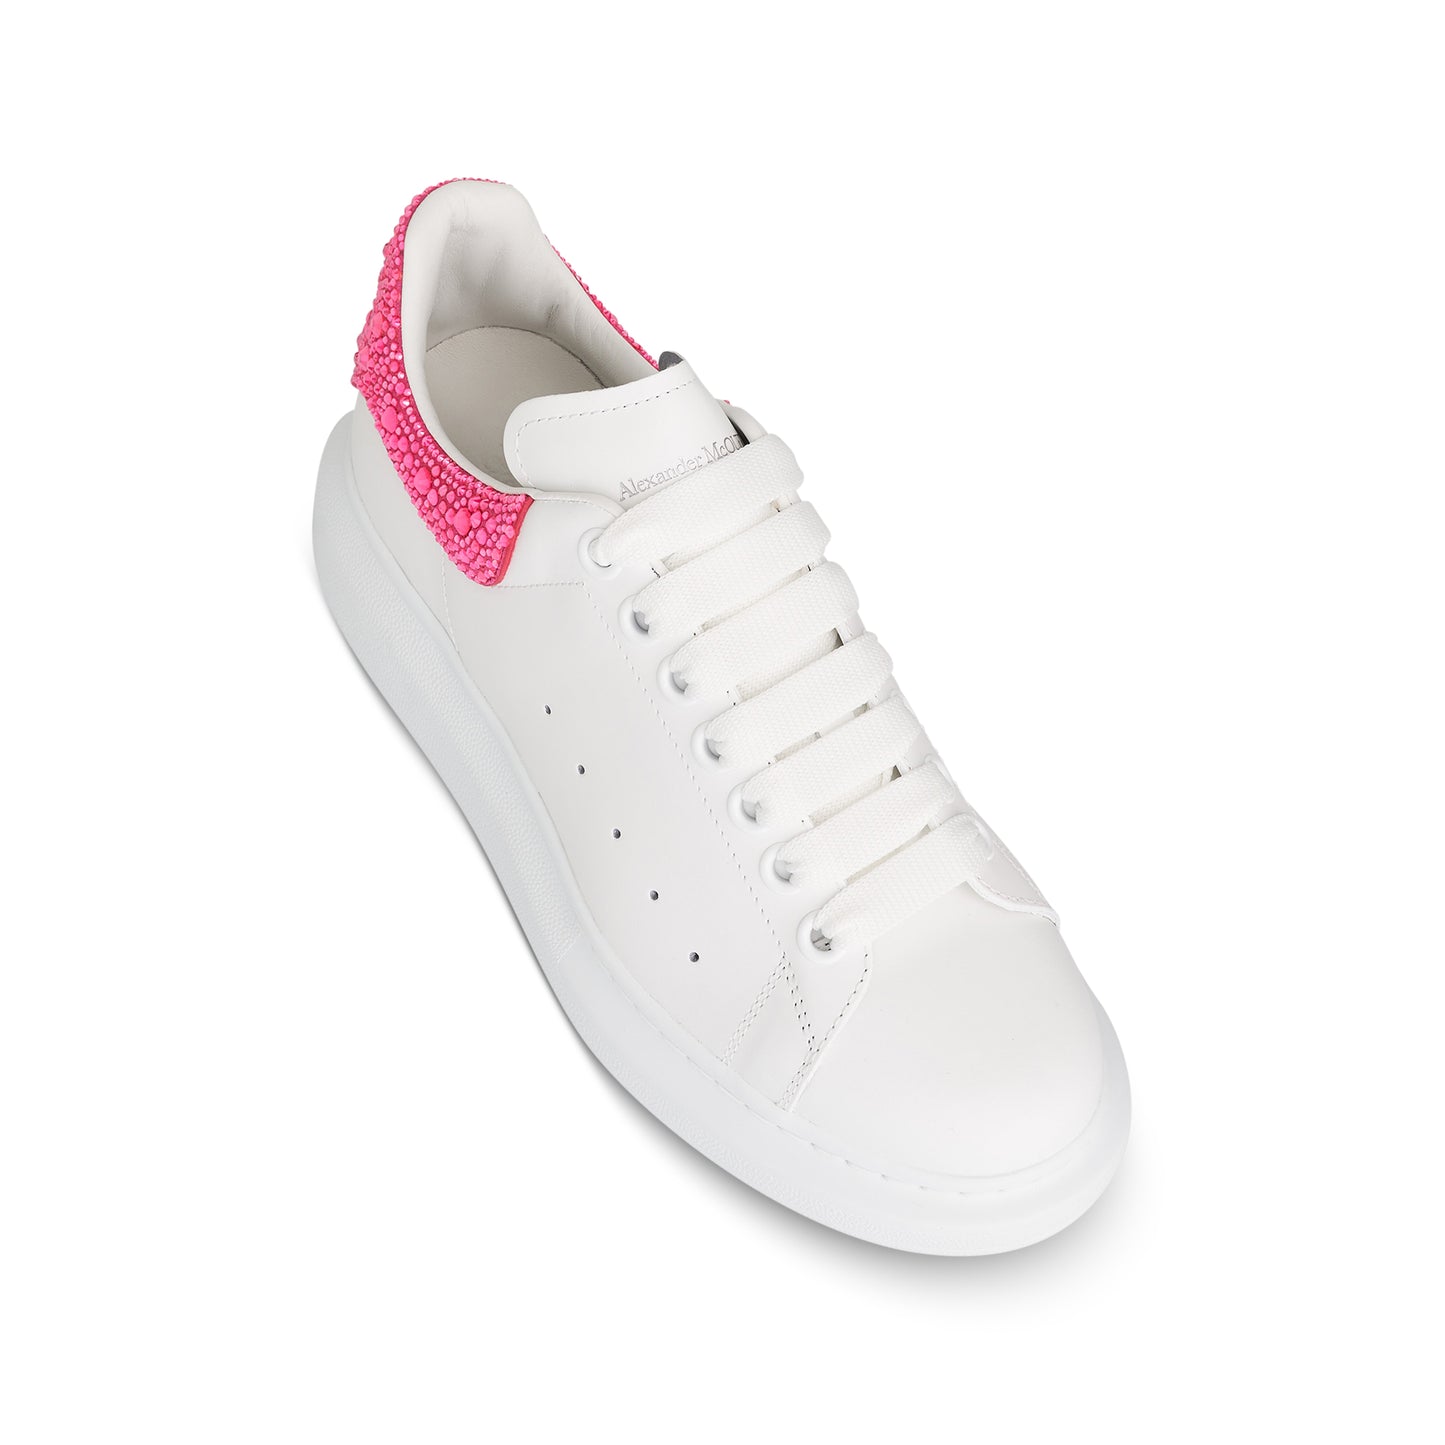 Larry Oversized Suede Sneaker in White/Halo Pink